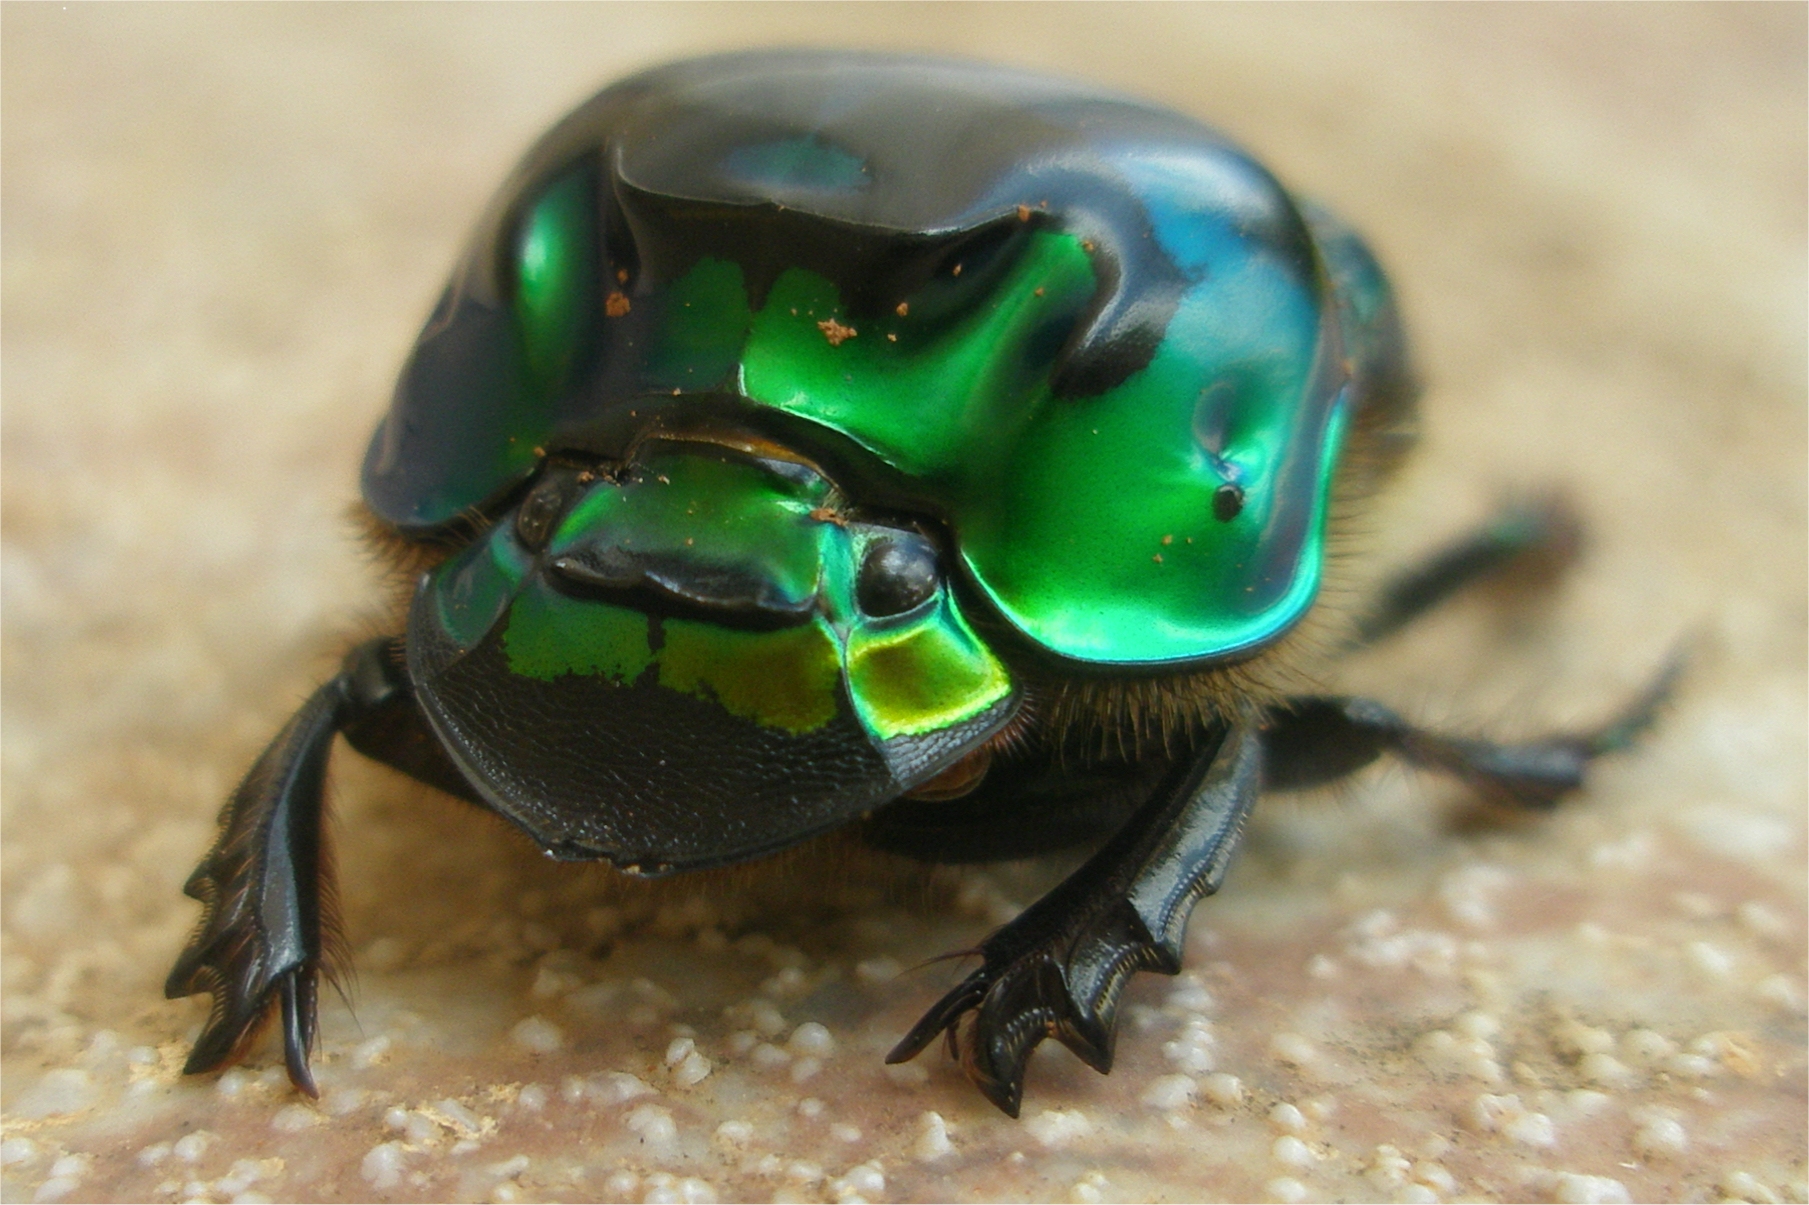 East Bay Science Cafe: 50 Shades of Green (Bugs) | Berkeley | Funcheap